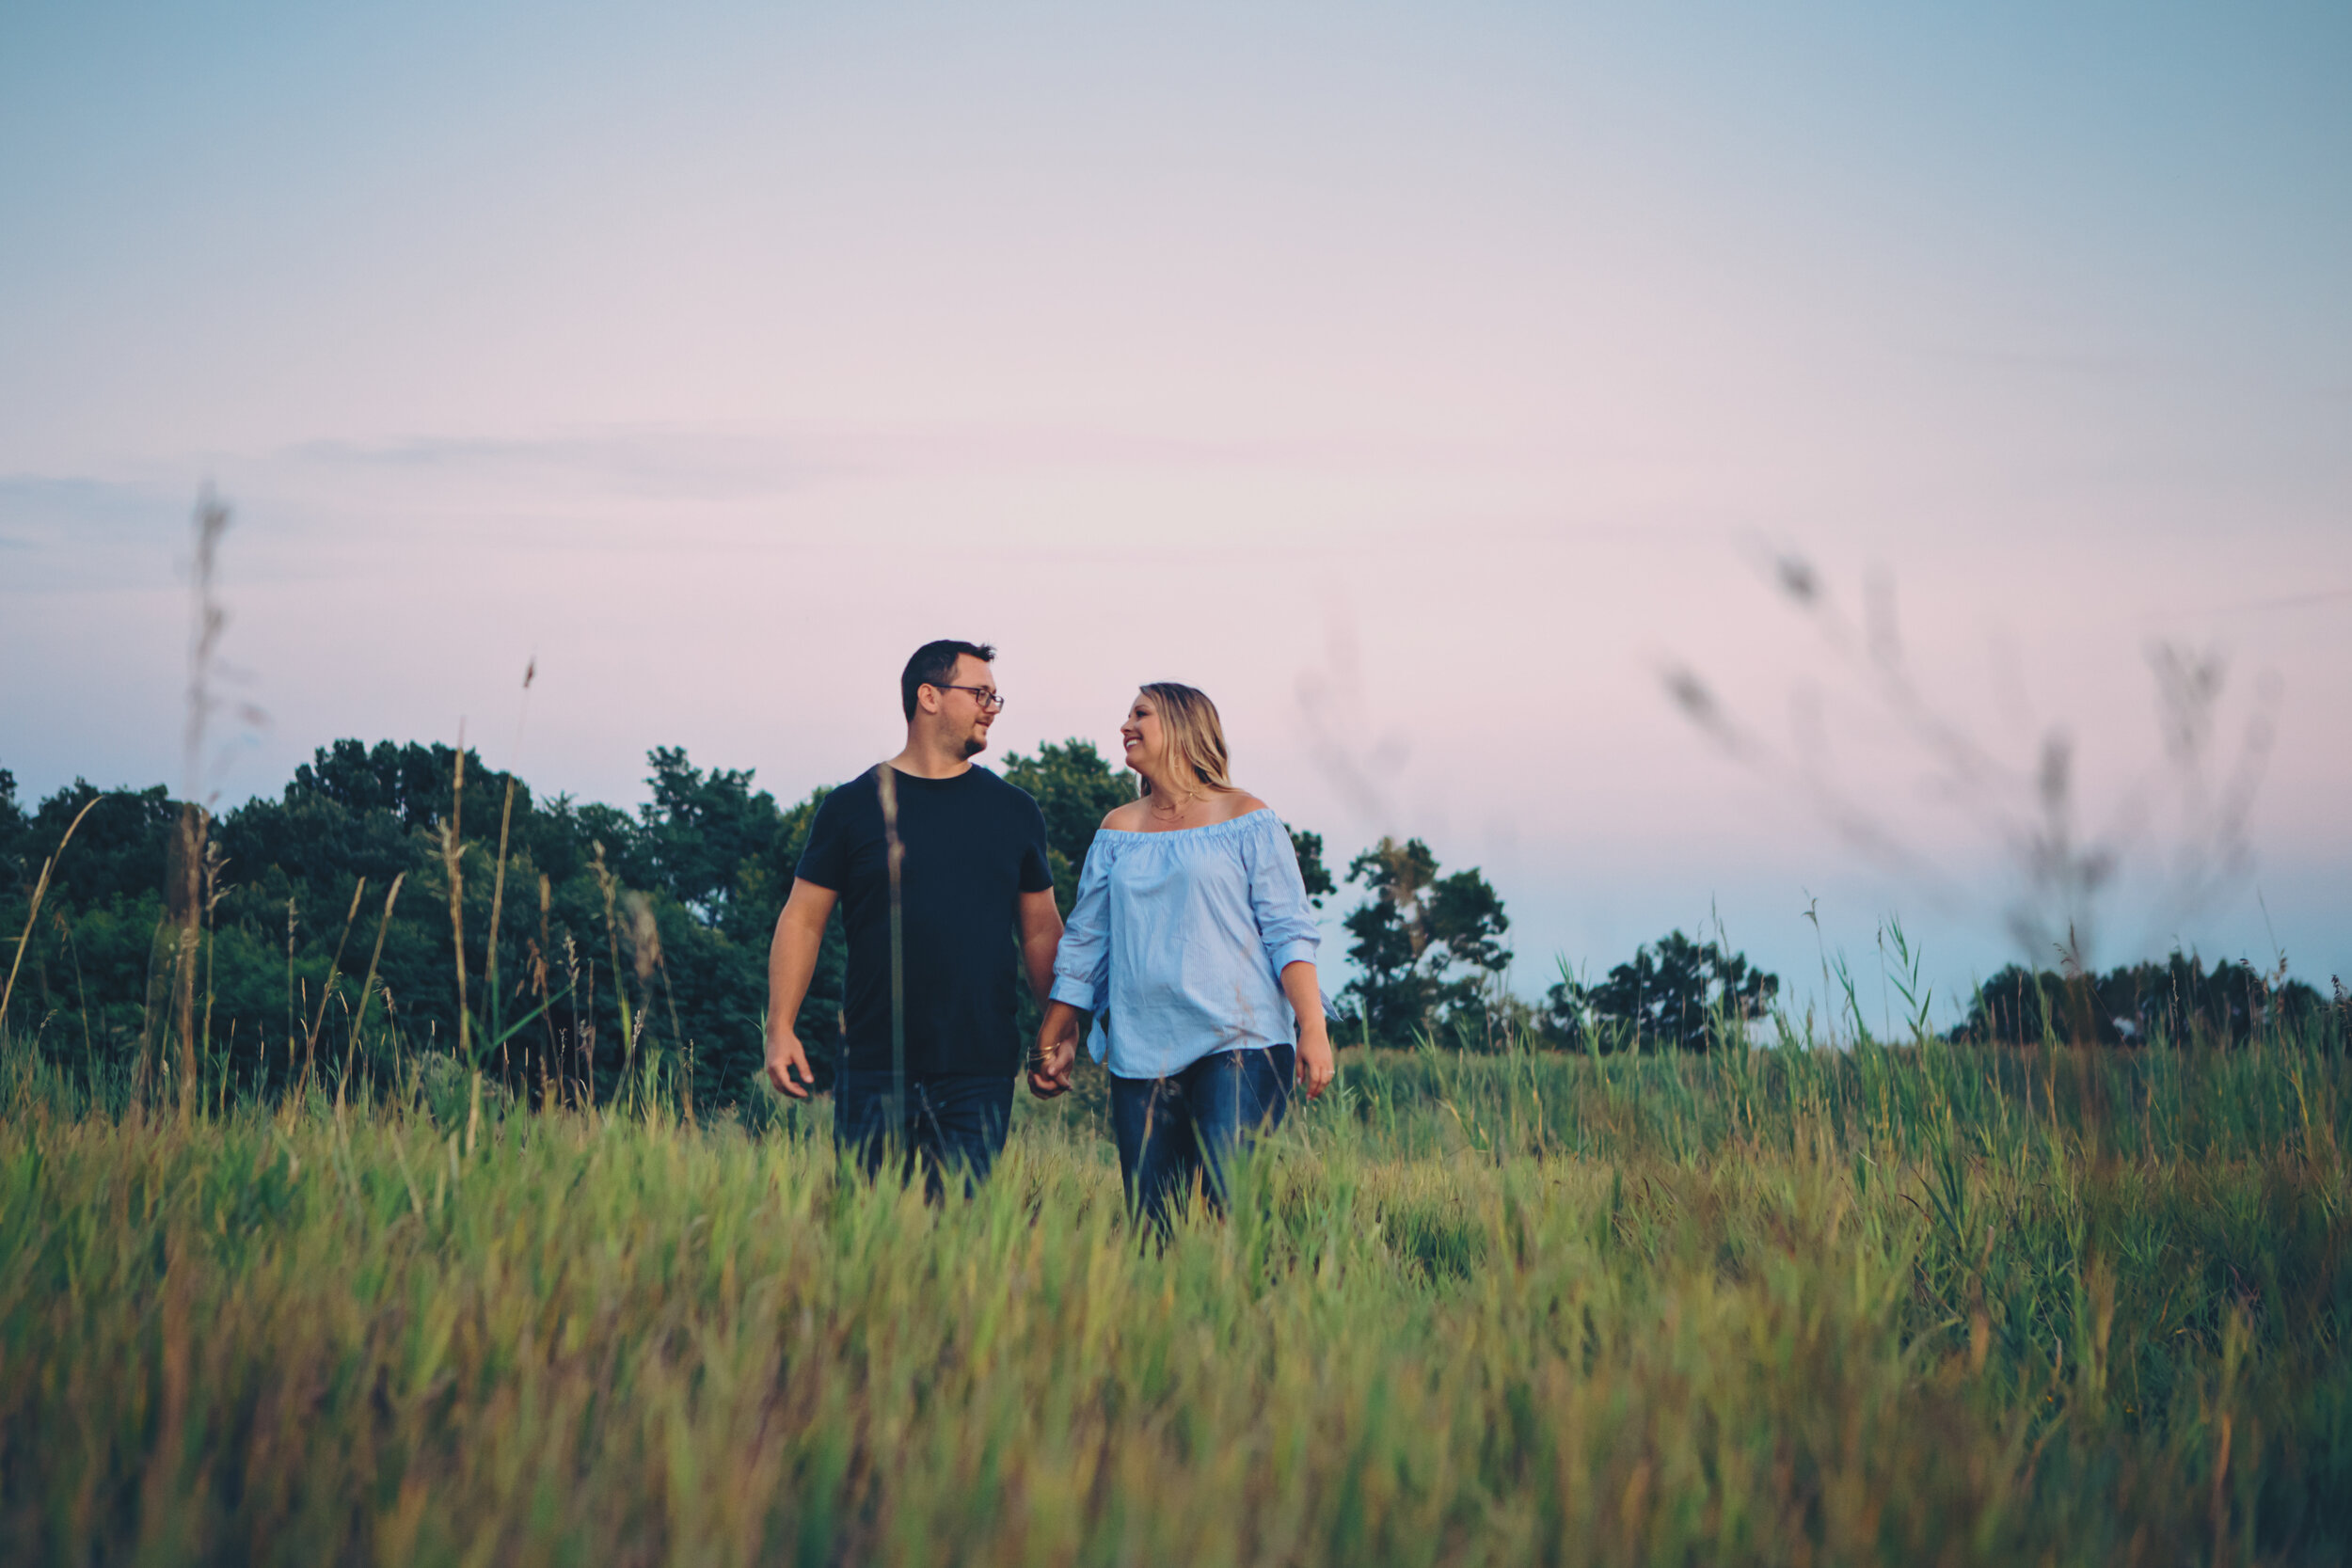  Hand in hand these two walk through a field of wildflowers together into forever #tealawardphotography #texasengagement #amarillophotographer #amarilloengagementphotographer #emotionalphotography #engagementphotography #couplesphotography #engagement #engaged #westernphotography #texasfiance 